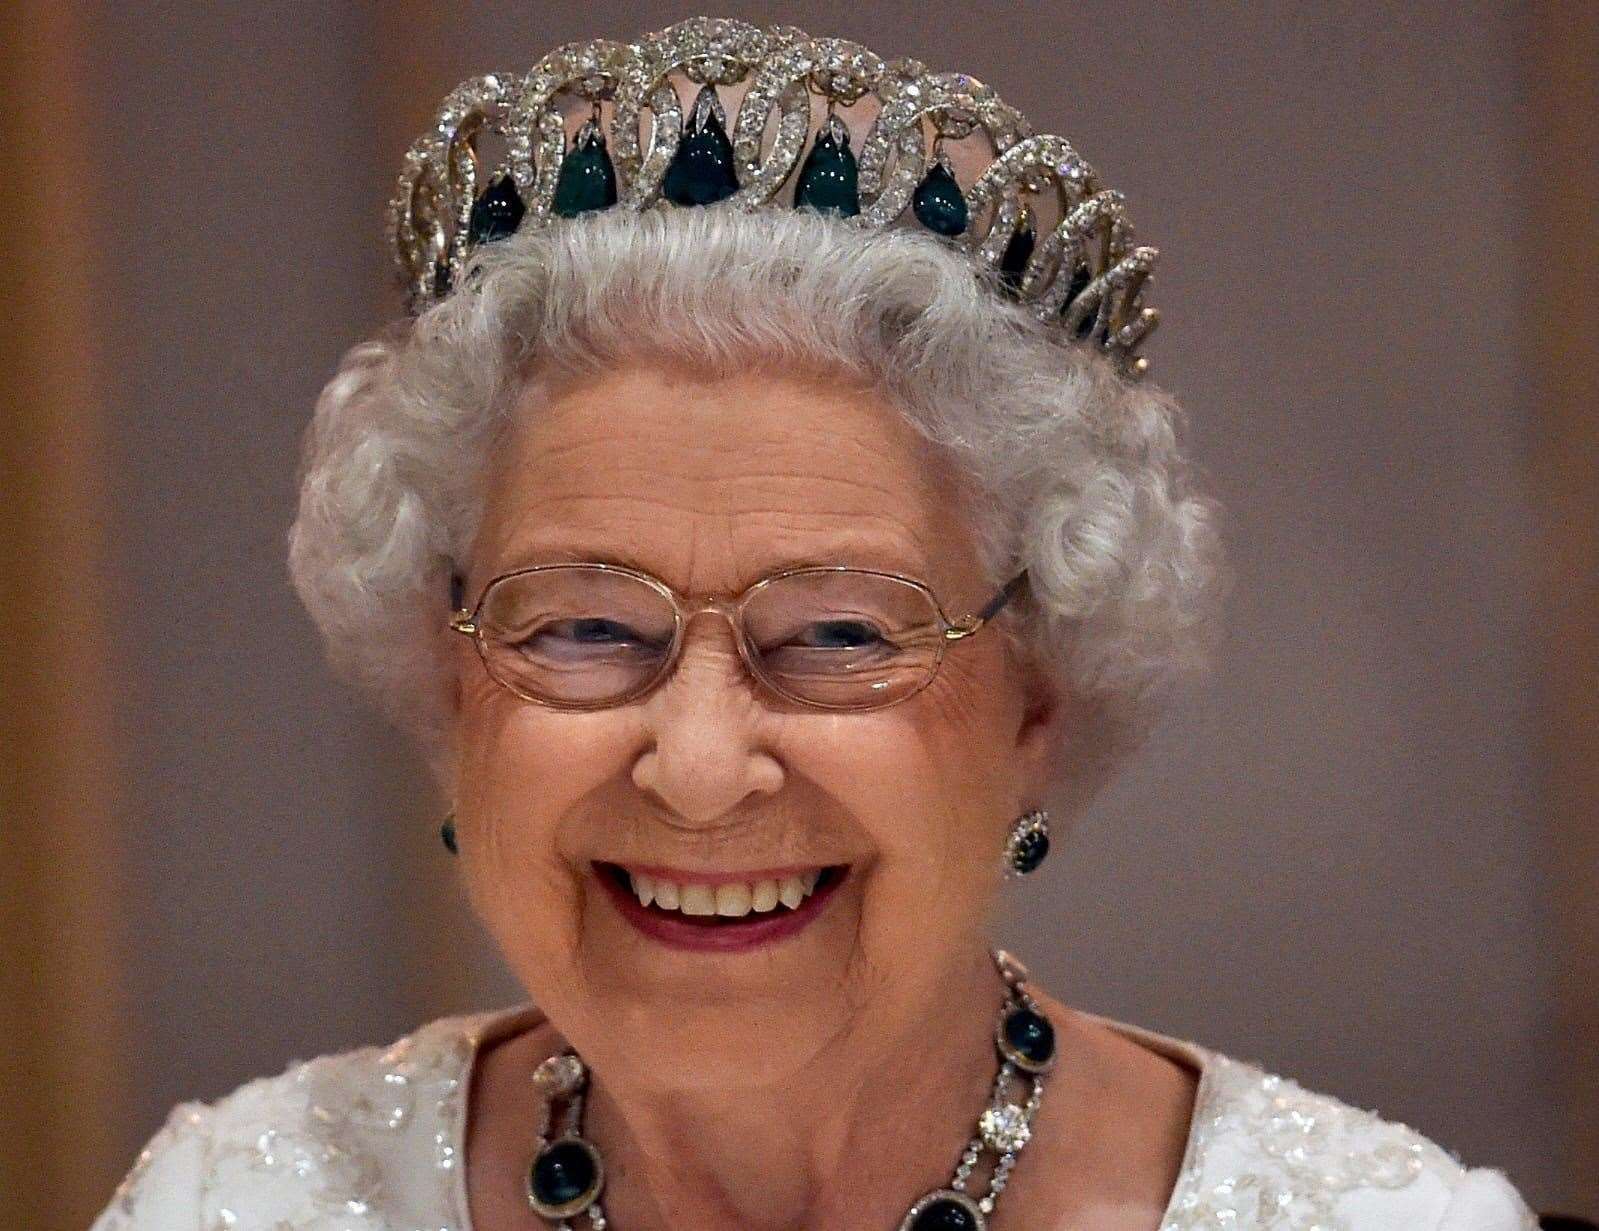 The search for a Platinum Pudding has been launched to mark The Queen's Jubilee